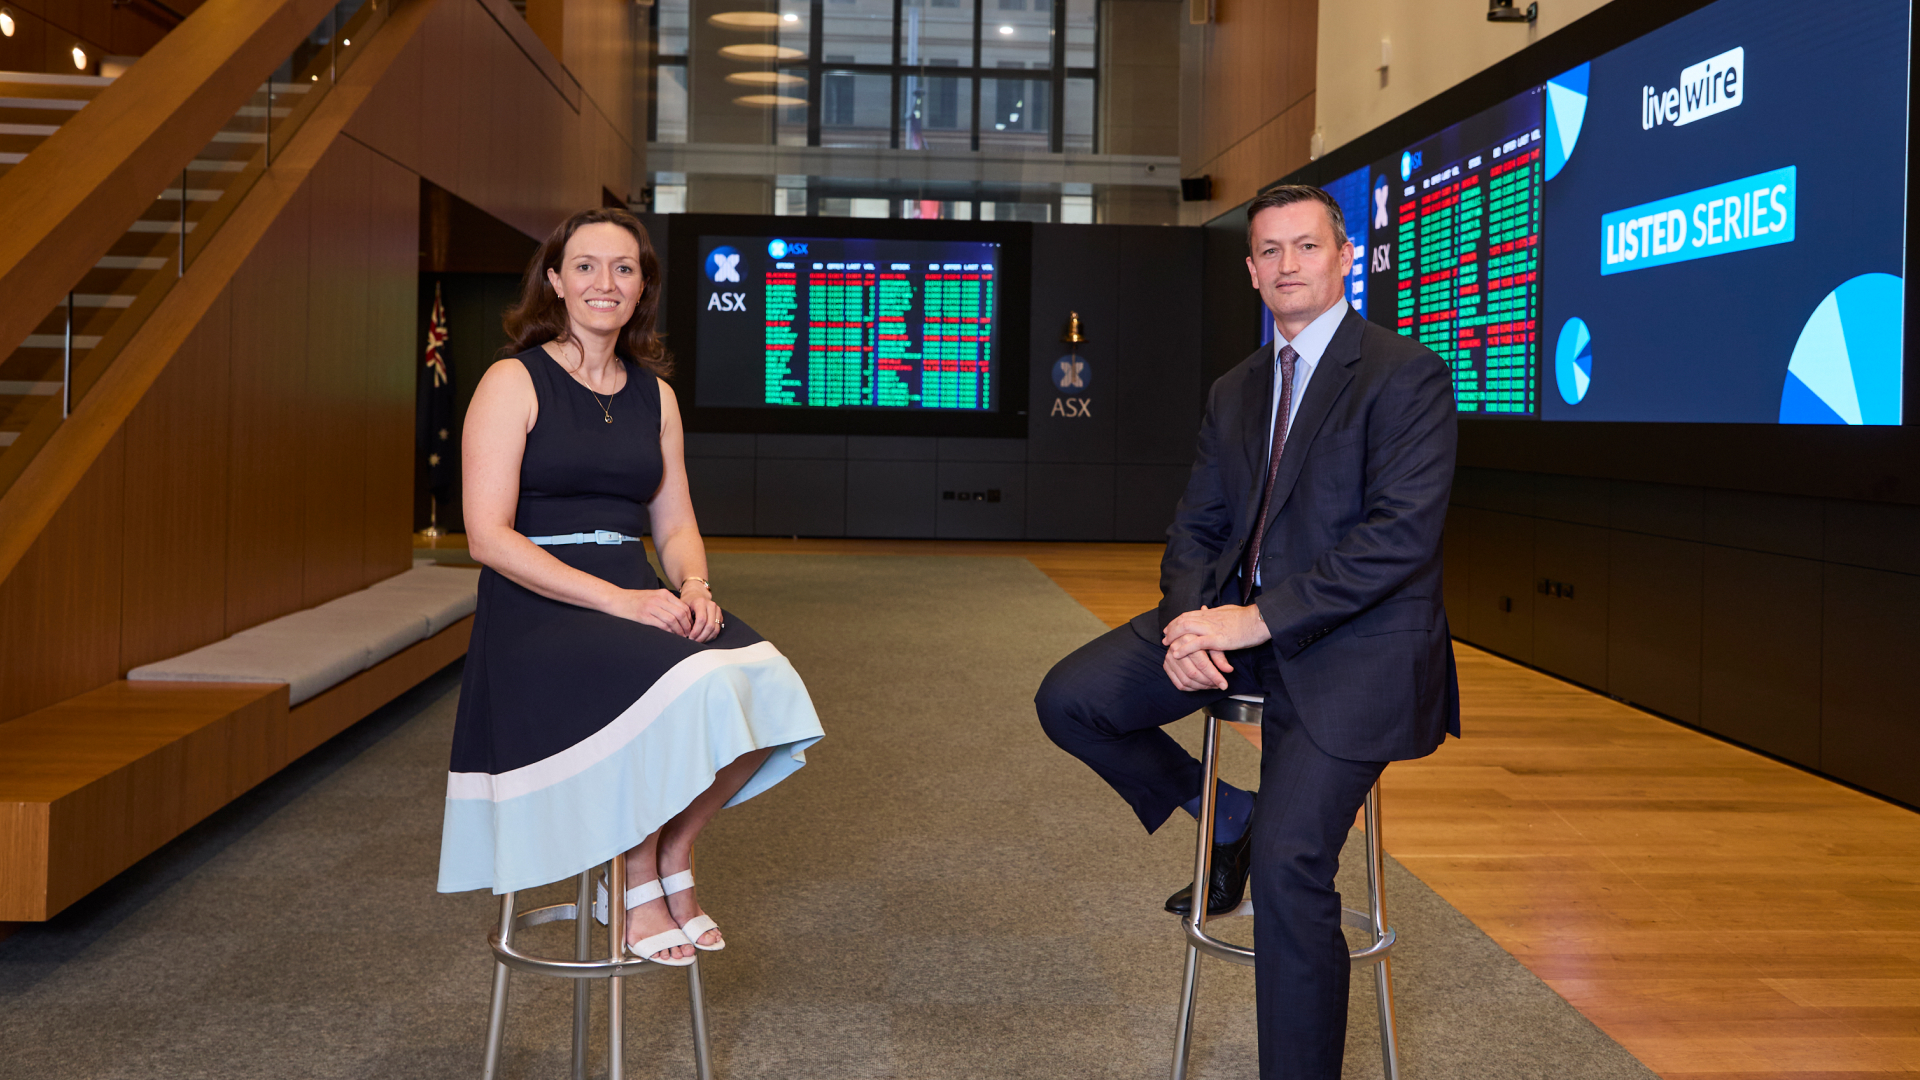 In discussion at the Australian Stock Exchange in Sydney.